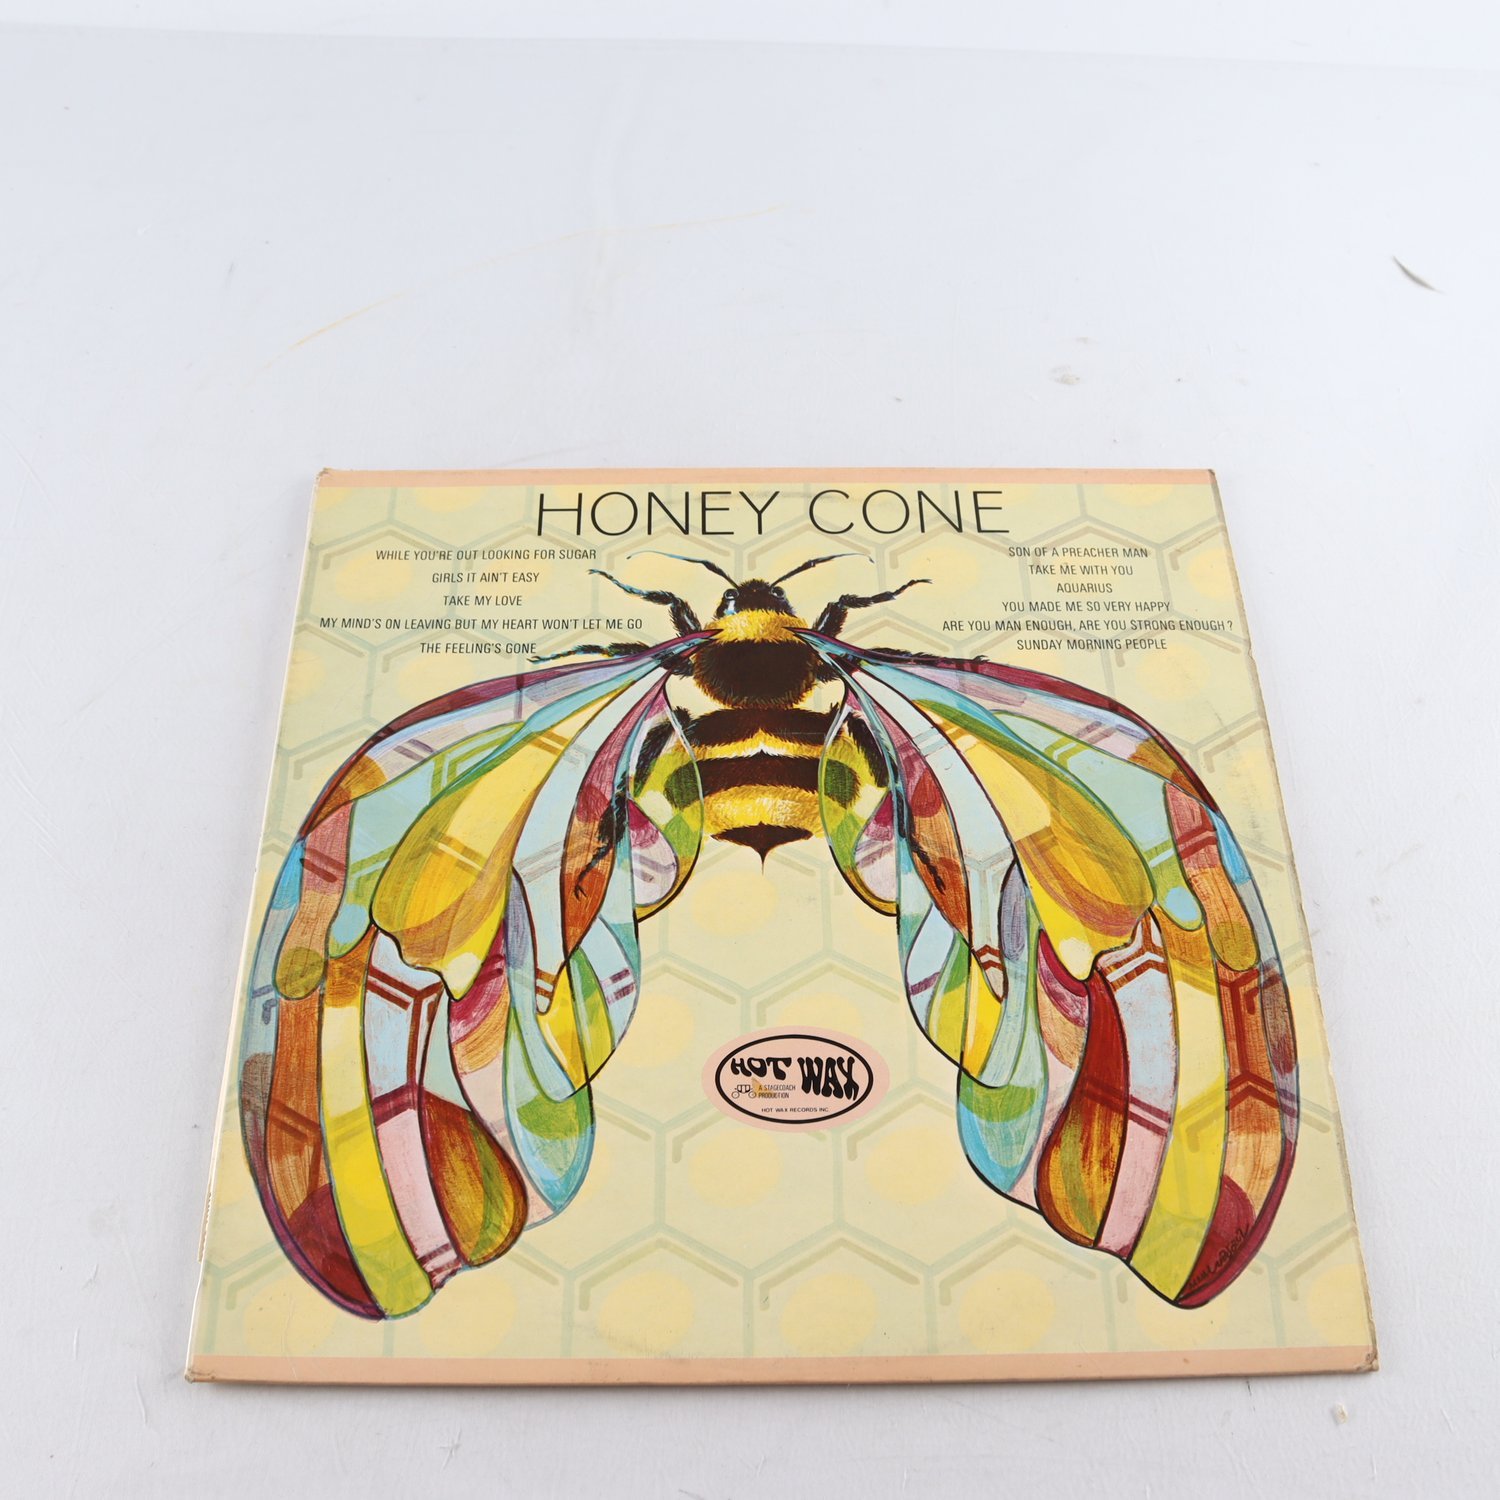 LP Honey Cone, Take Me With You